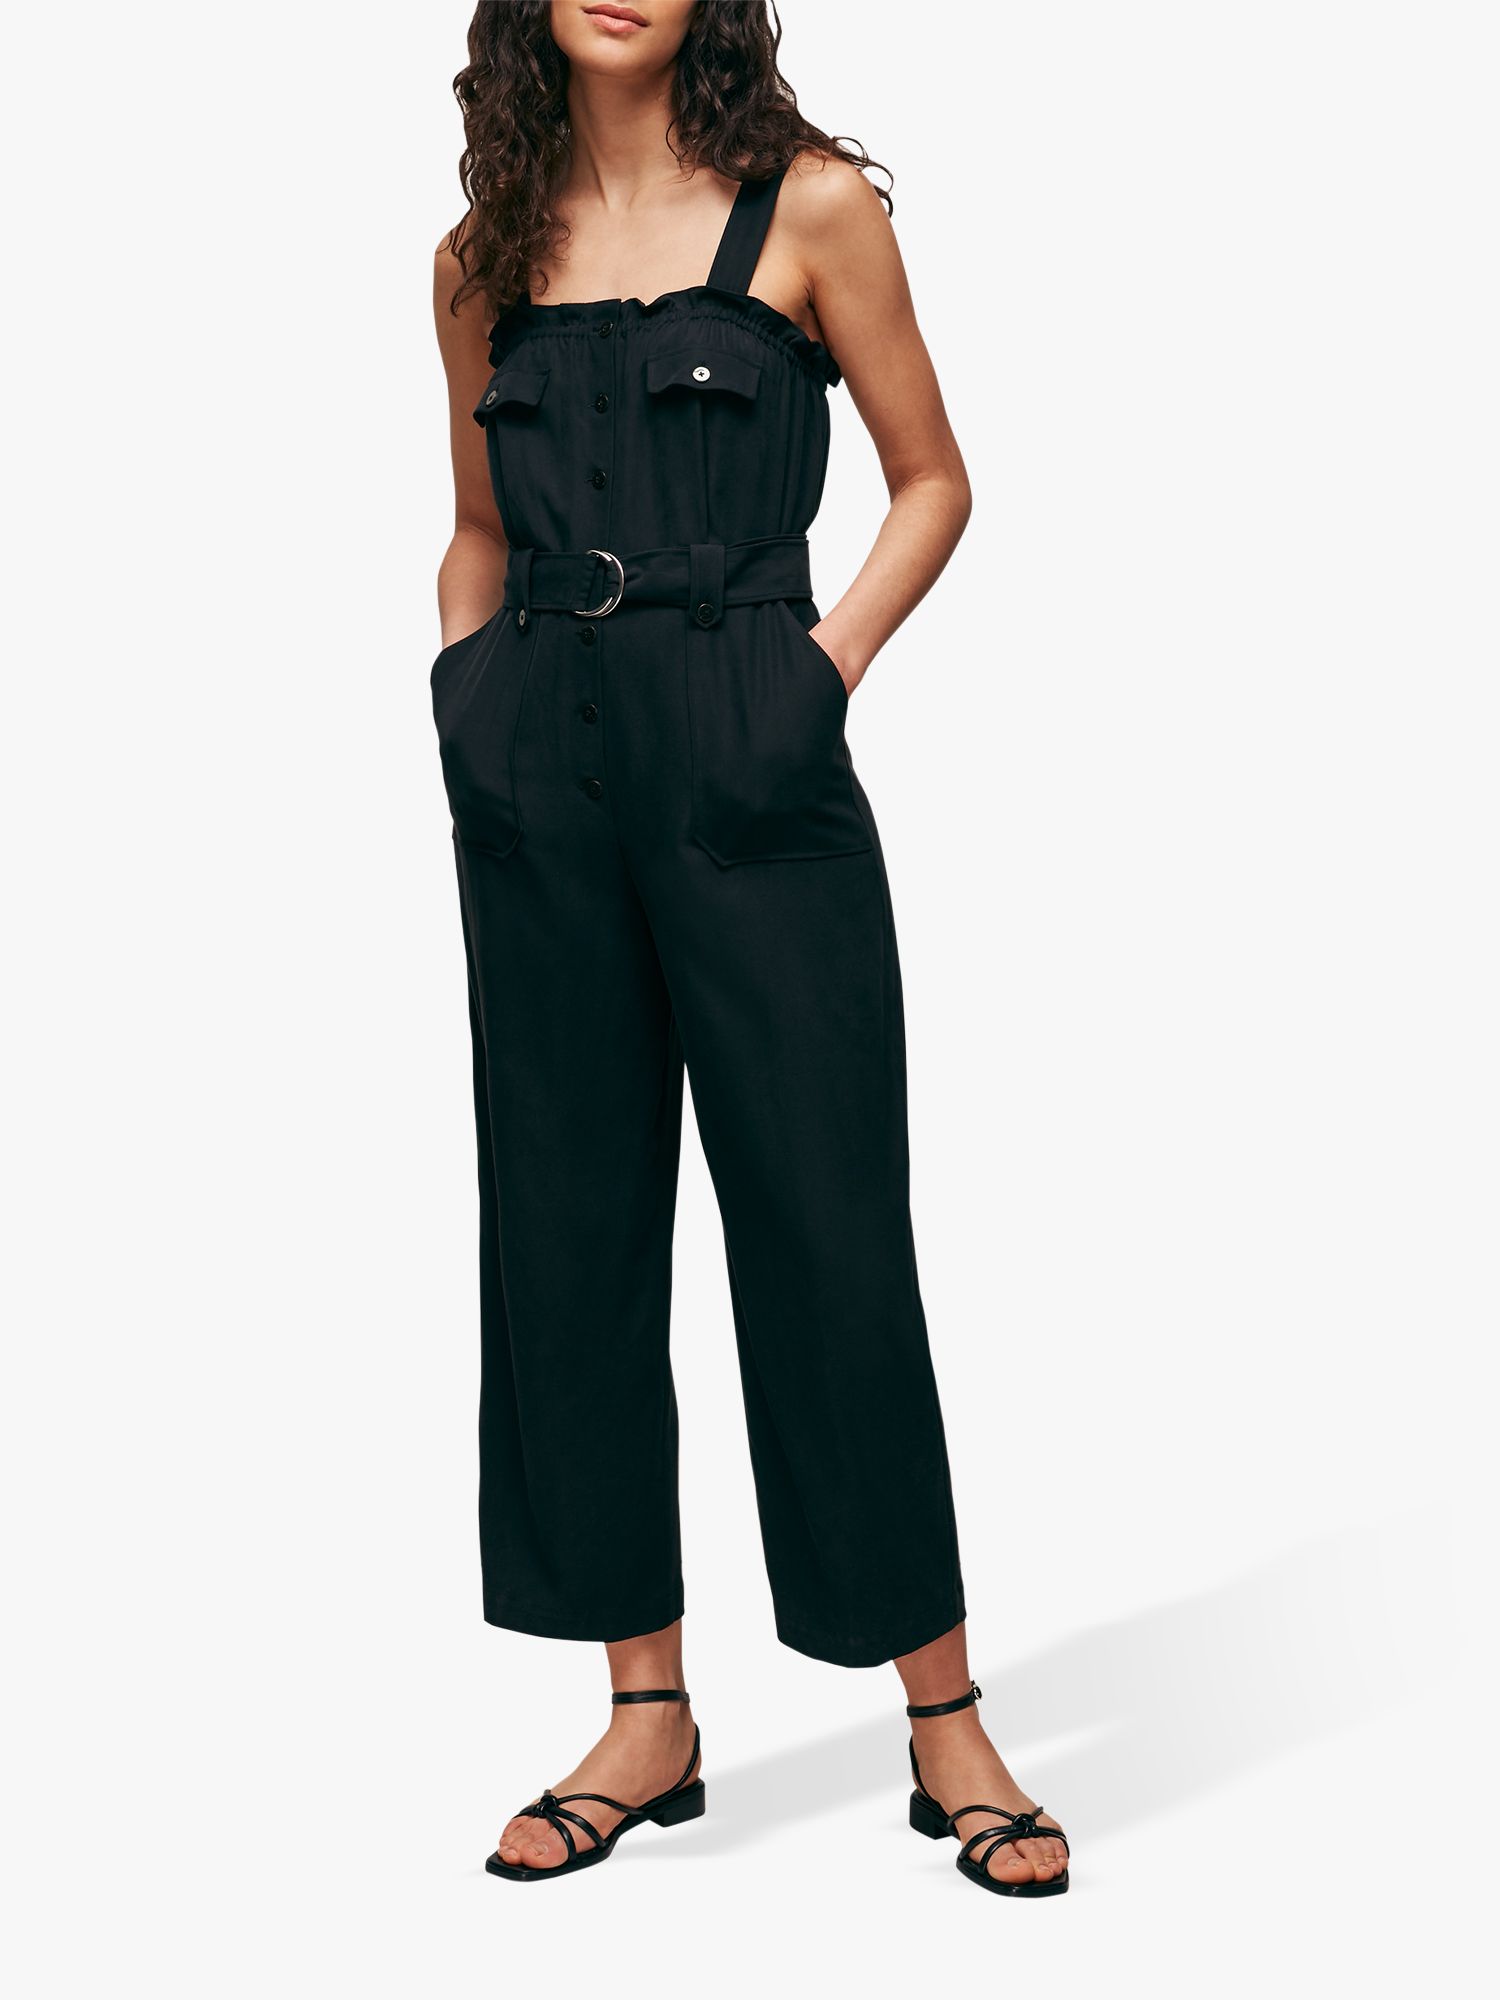 Whistles Frill Utility Belted Jumpsuit, Black